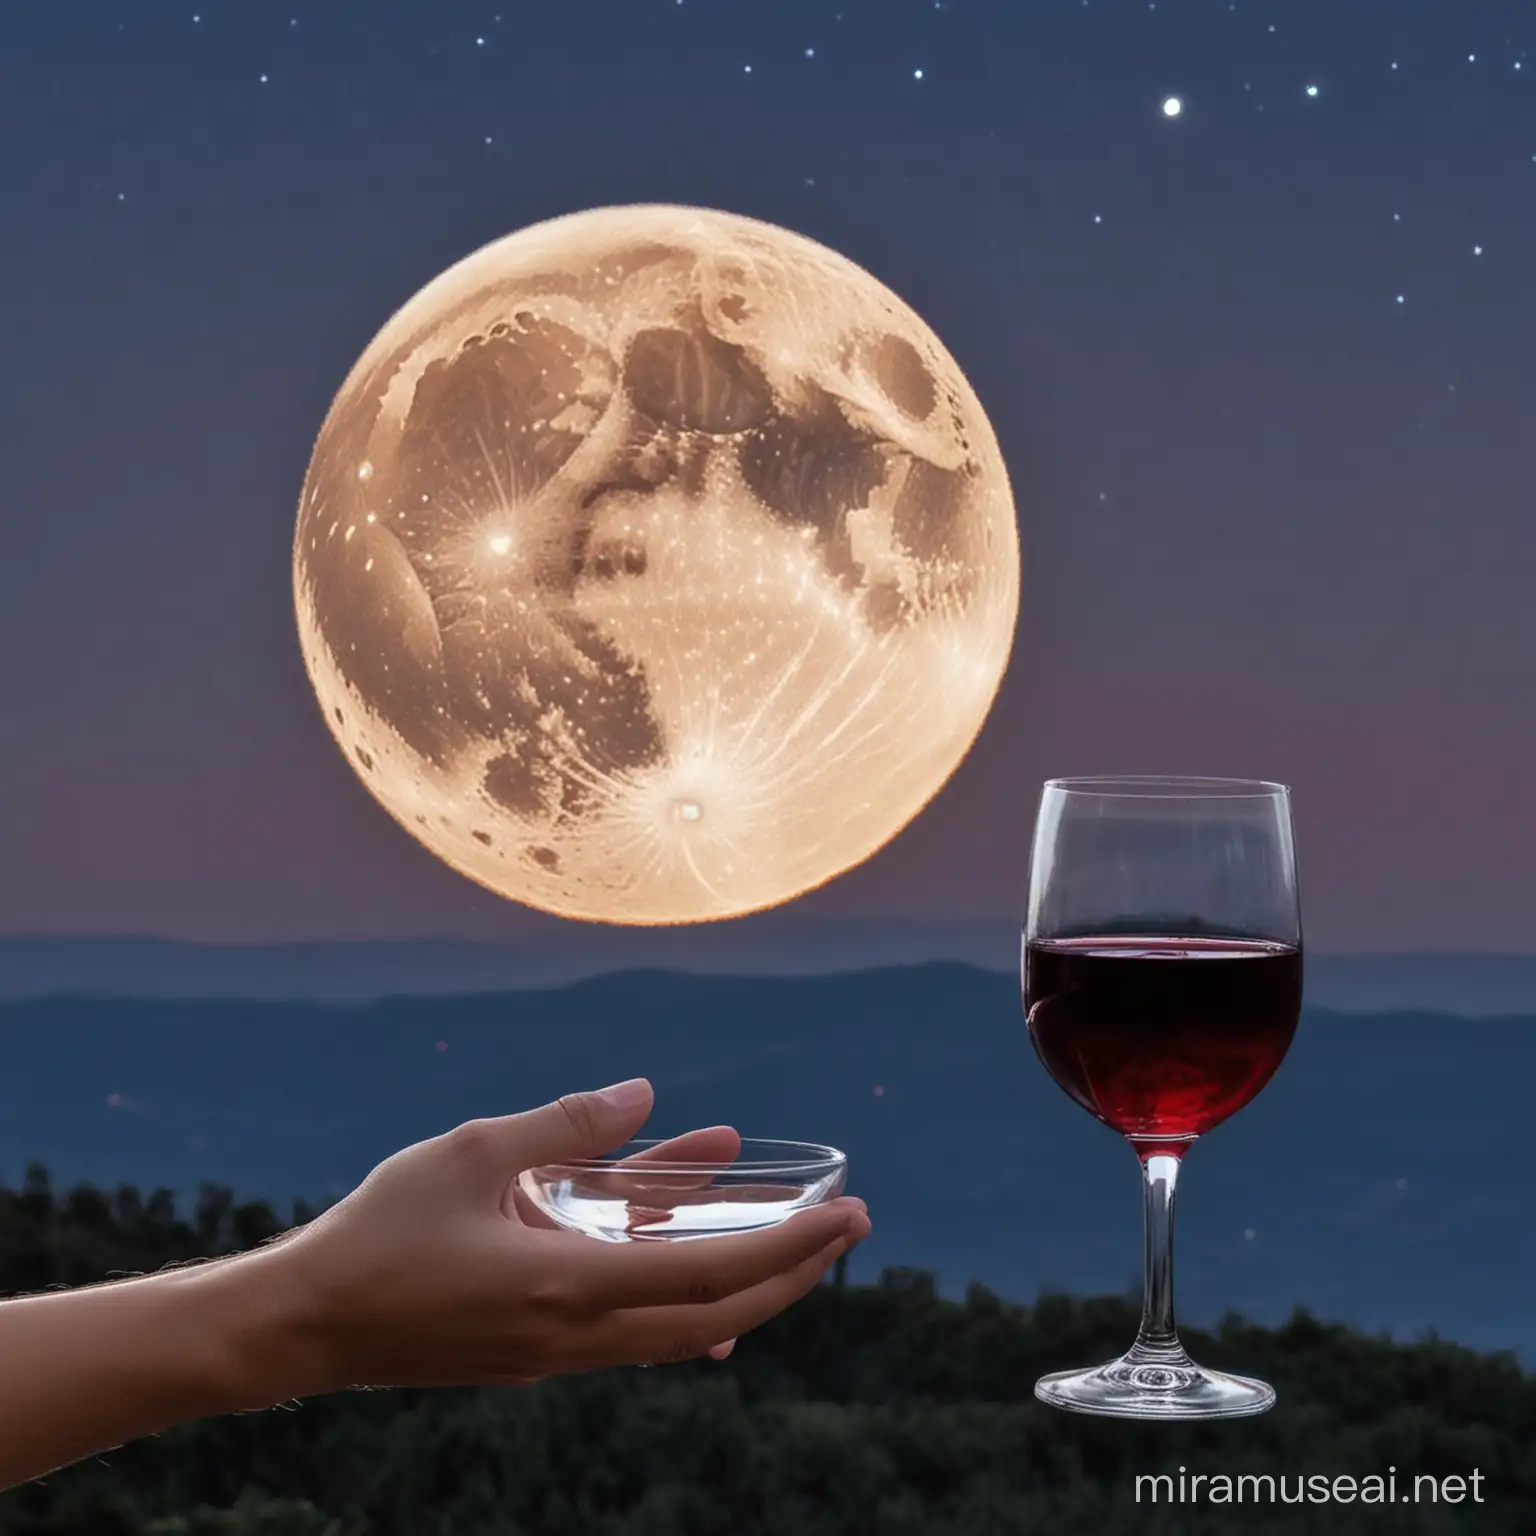 MidAutumn Festival Moon Viewing with Wine